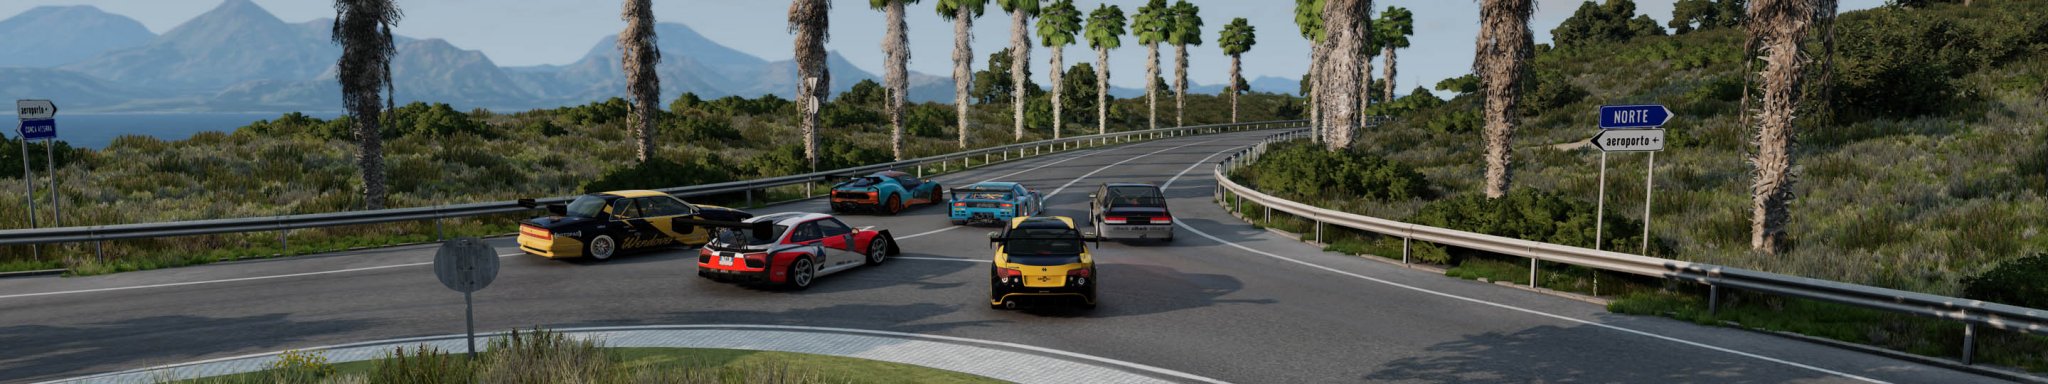 1 BeamNG ITALY Freeway Run ROUTE A with VARIOUS CARS copy.jpg